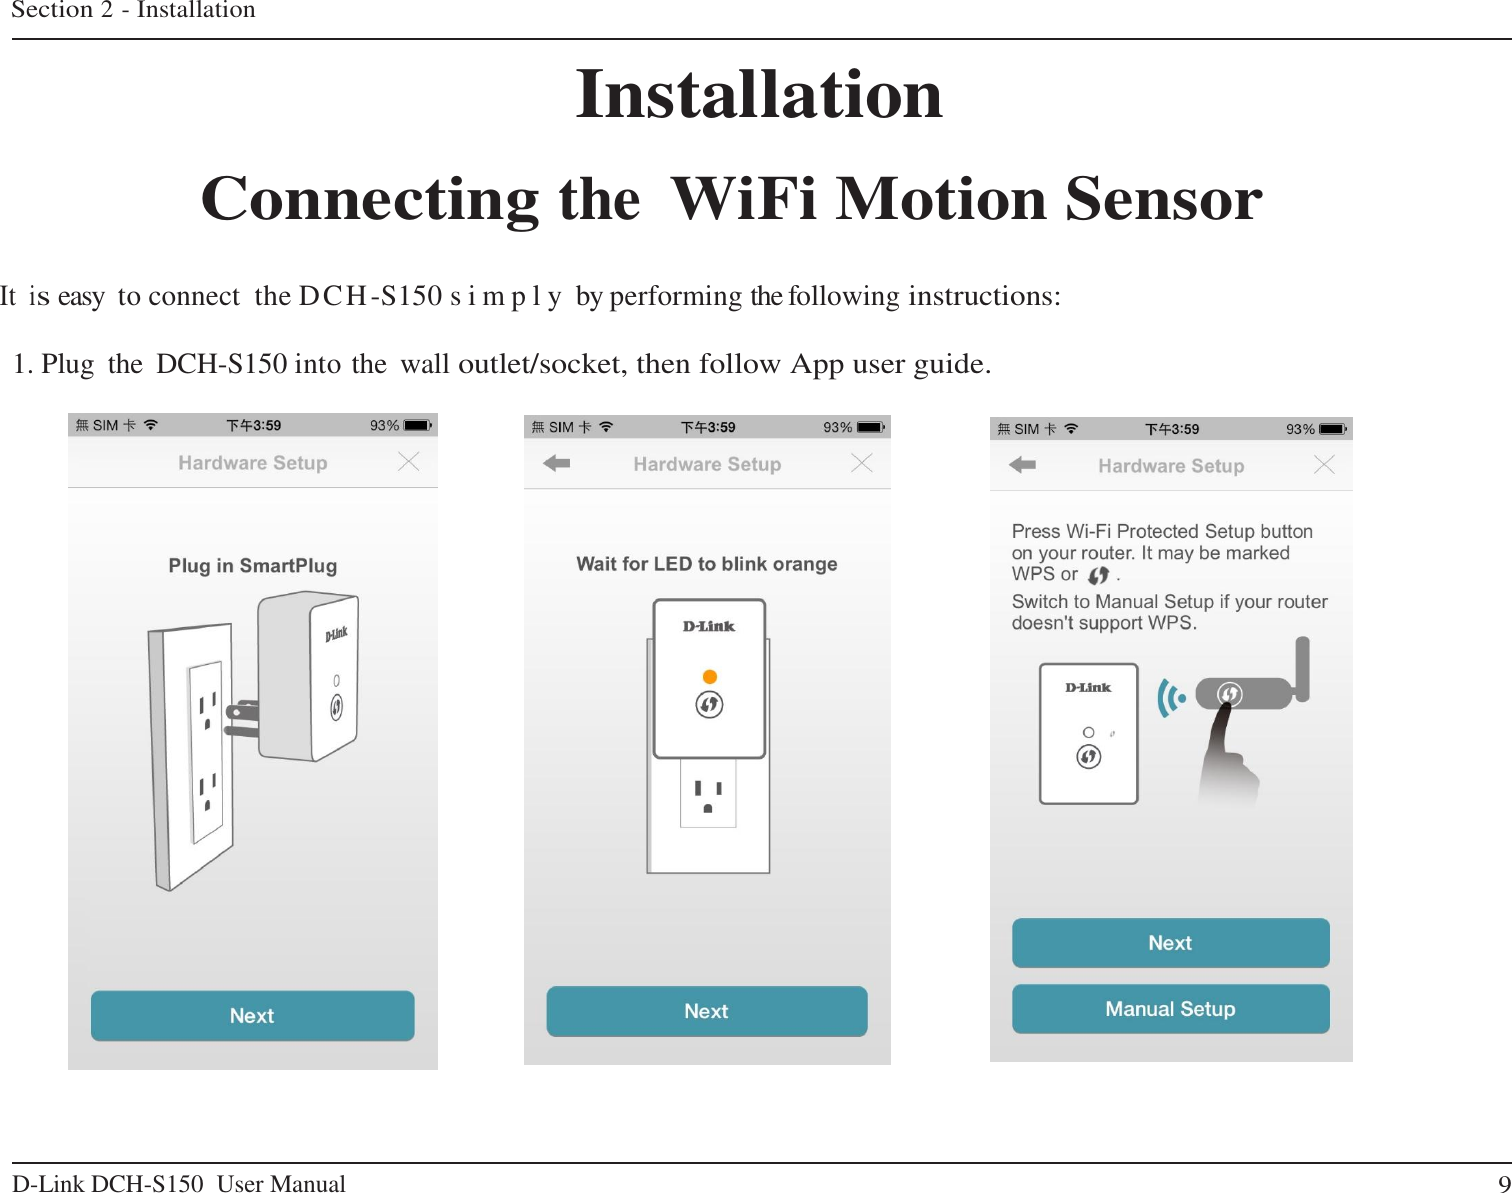 D-Link DCH-S150  User Manual  9   Section 2 - Installation    Installation  Connecting the WiFi Motion Sensor   It is easy to connect the DCH-S150 s i m p l y  by performing the following instructions:   1. Plug  the  DCH-S150 into the  wall outlet/socket, then follow App user guide.                                       